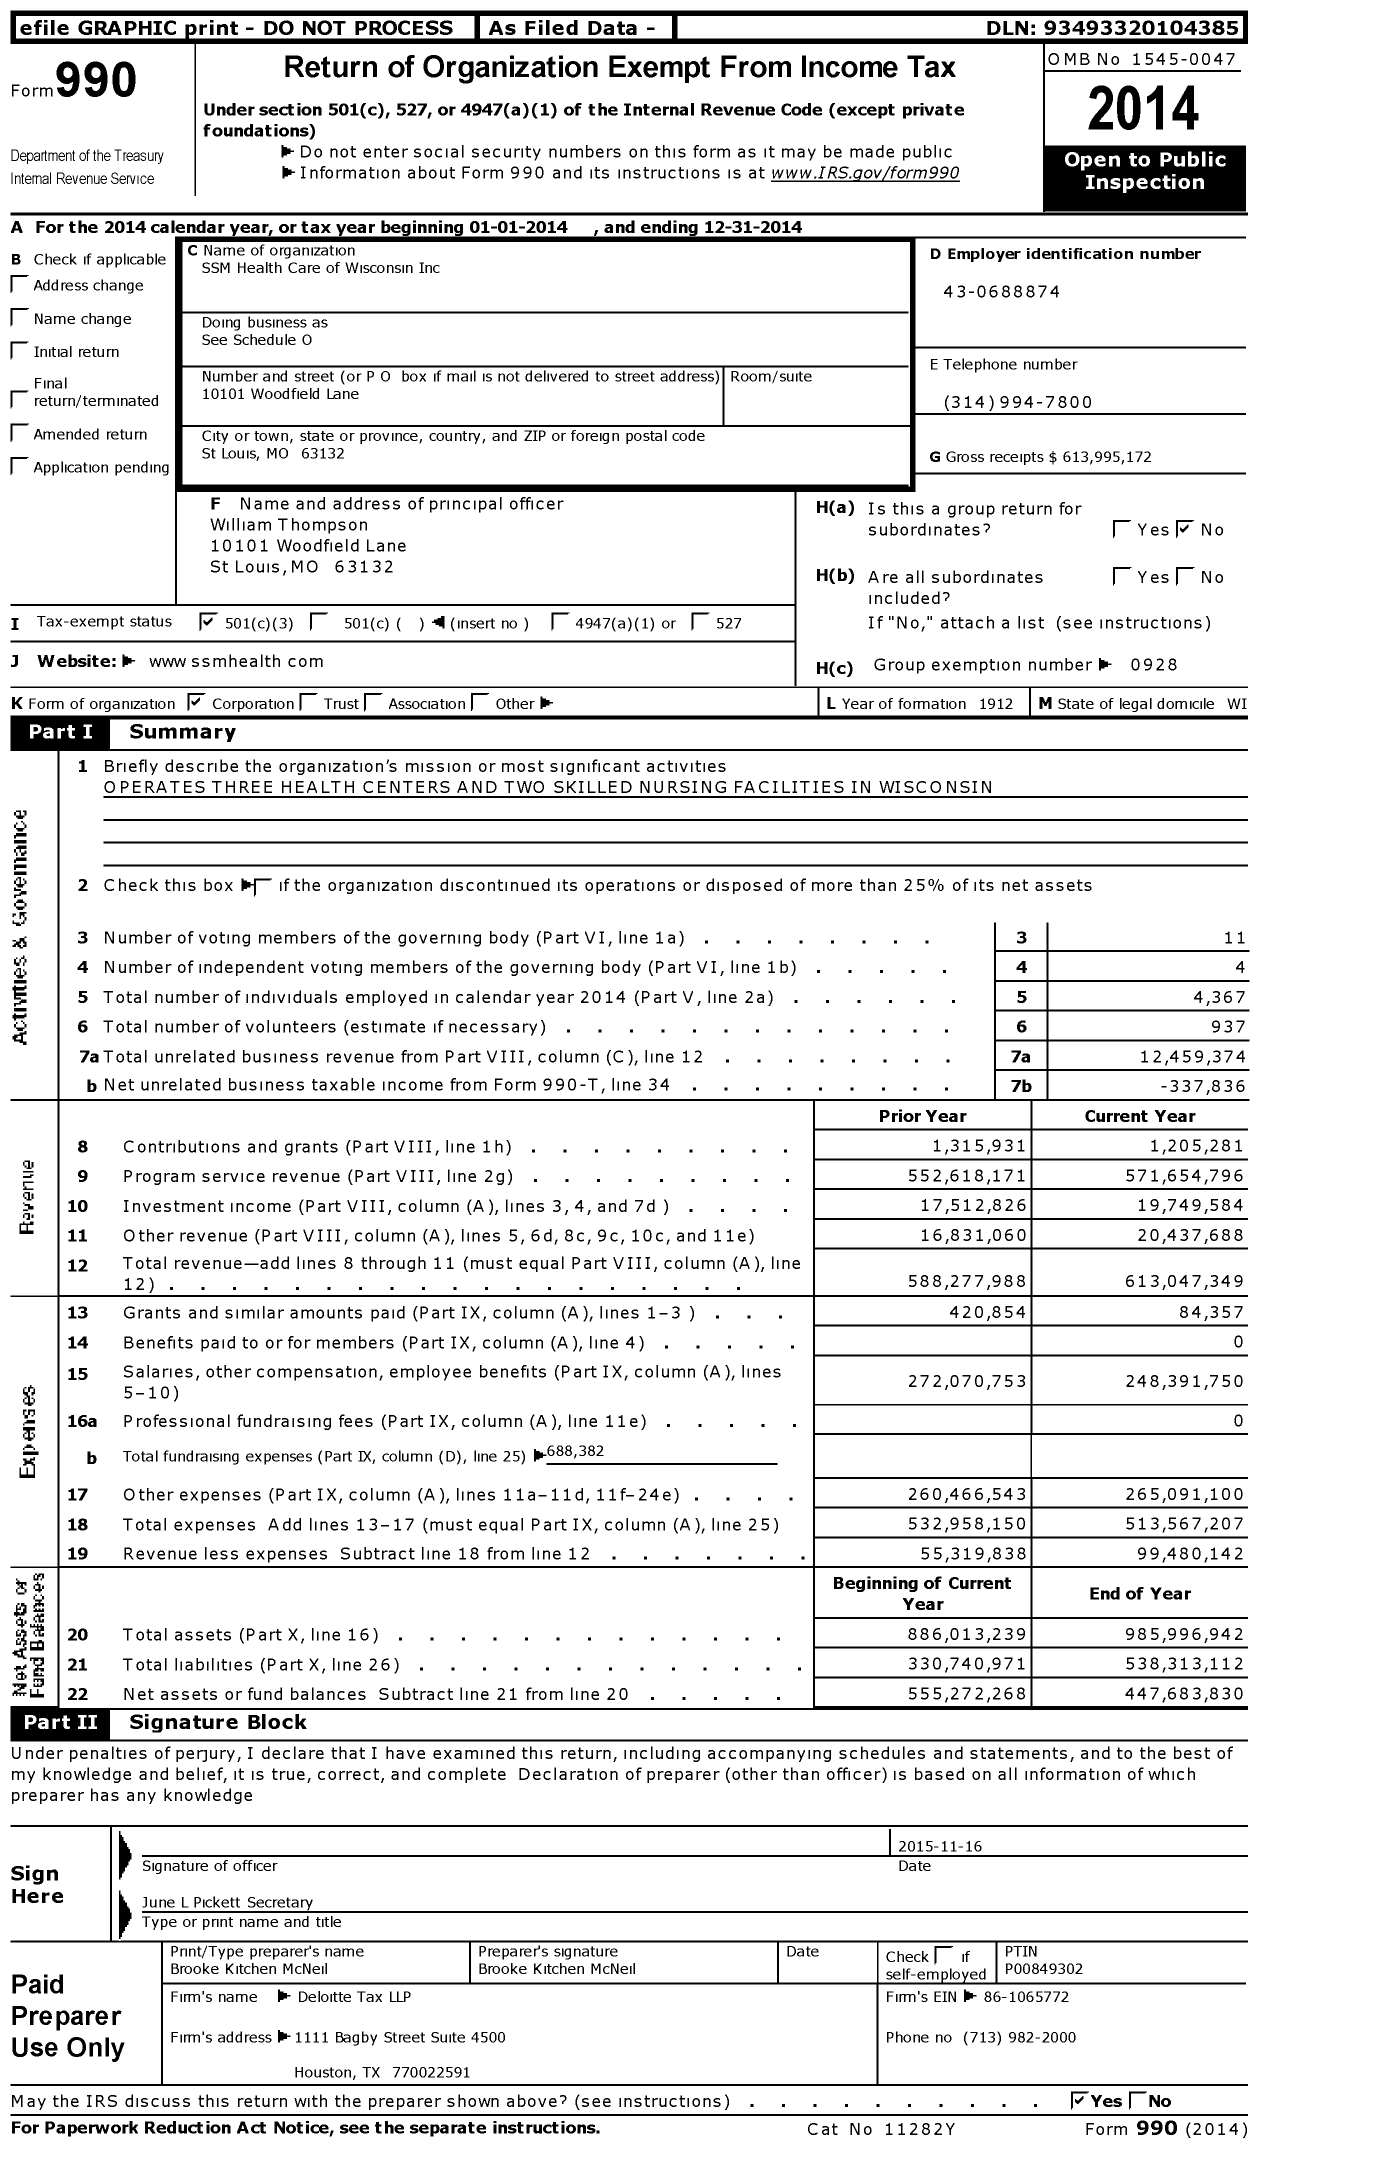 Image of first page of 2014 Form 990 for SSM Health Care of Wisconsin